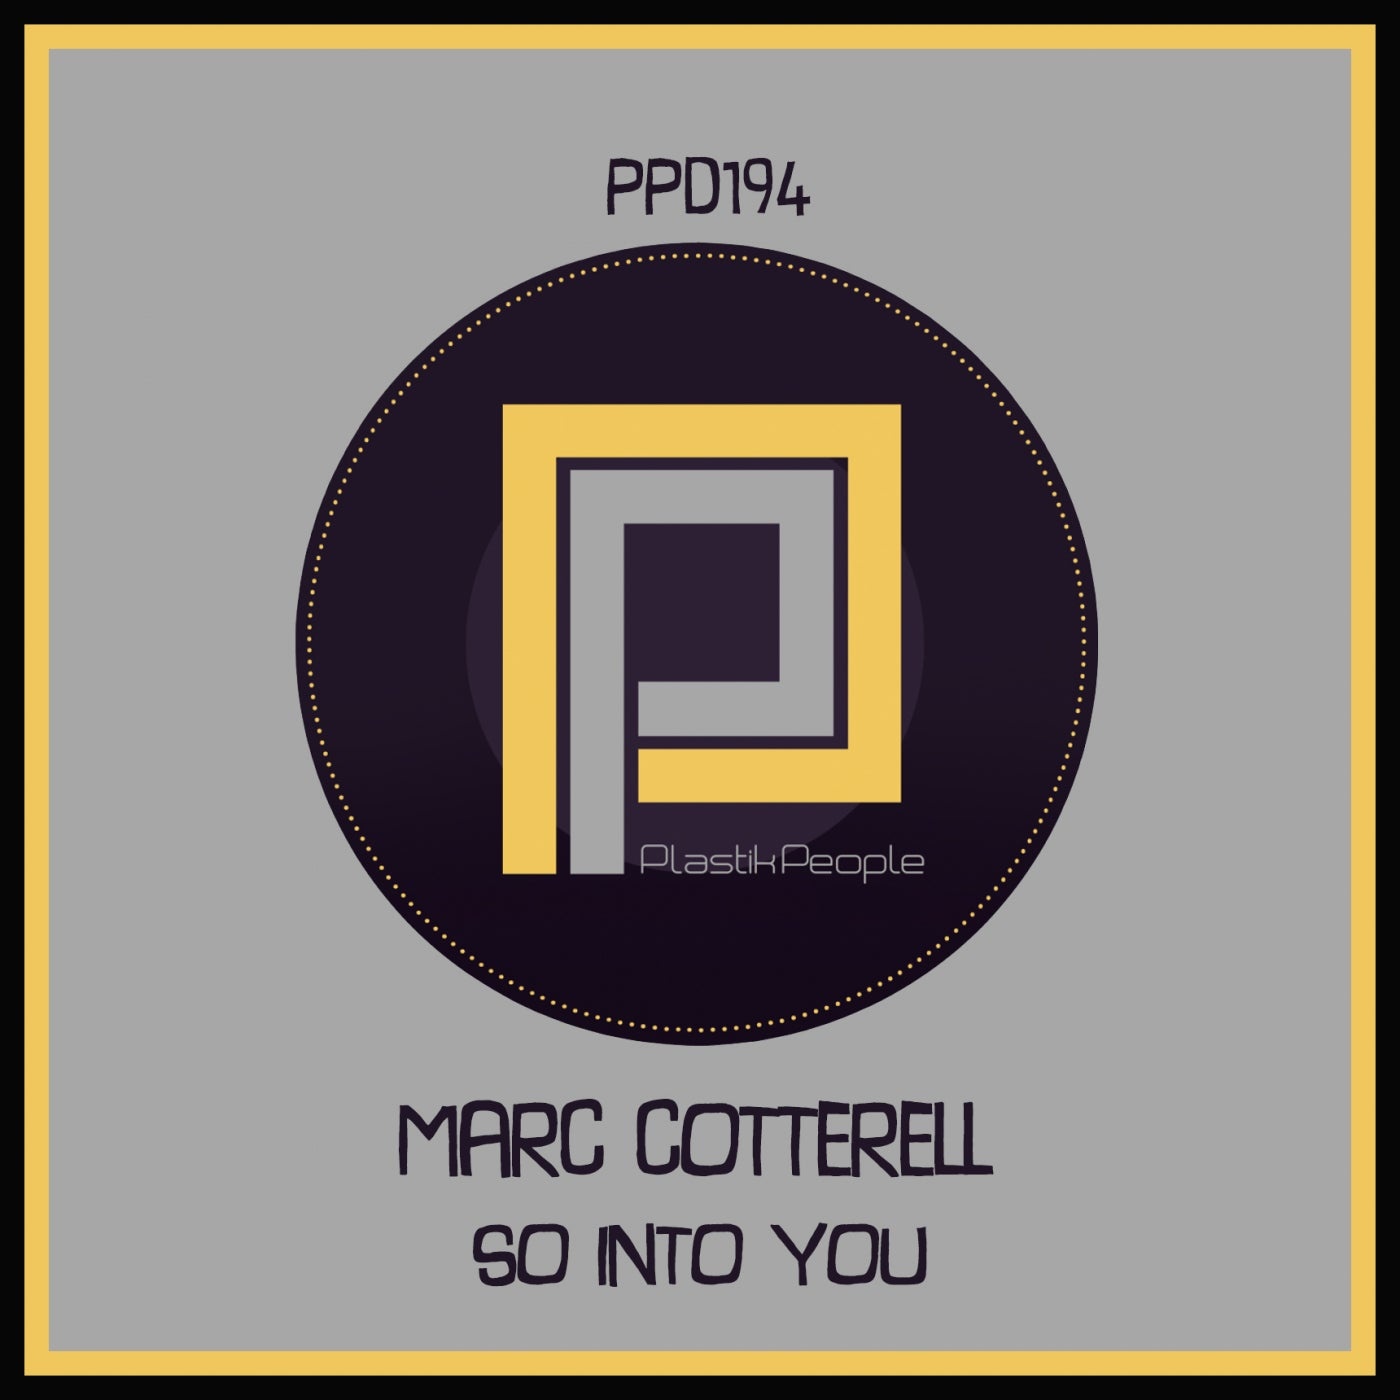 Marc Cotterell - So Into you [PPD194]